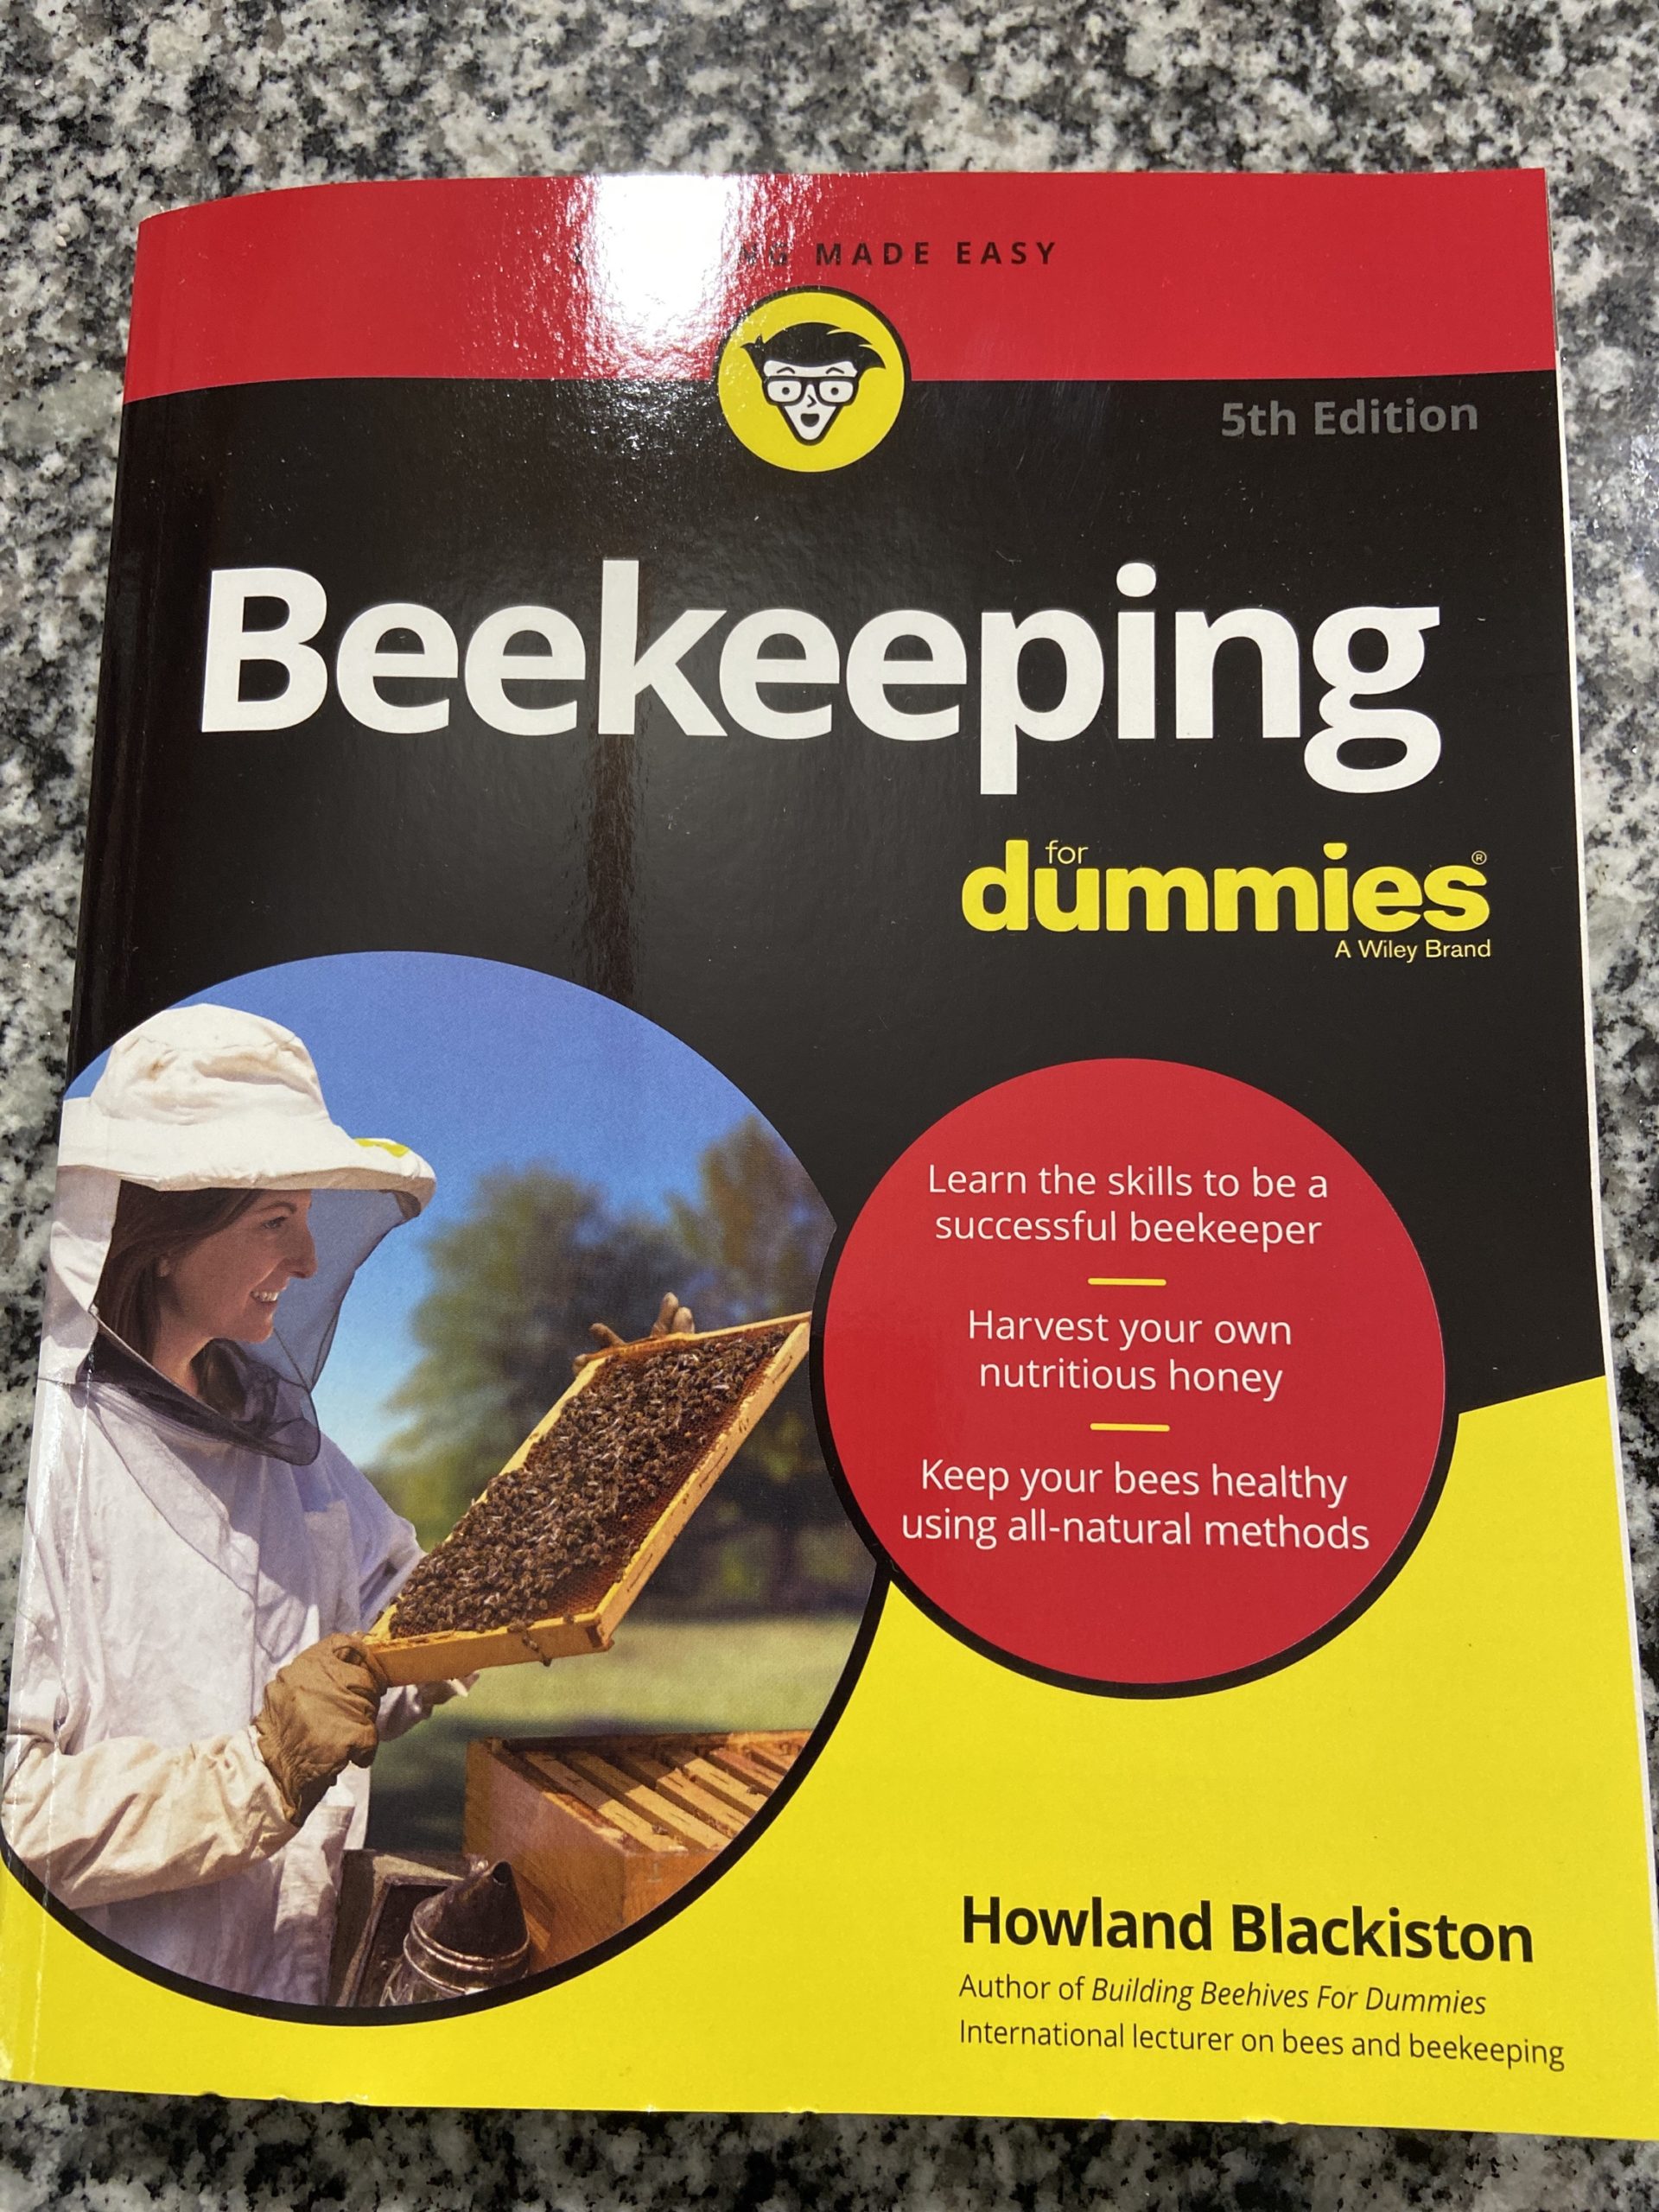 Beekeeping For Dummies by Howland Blackiston, Paperback